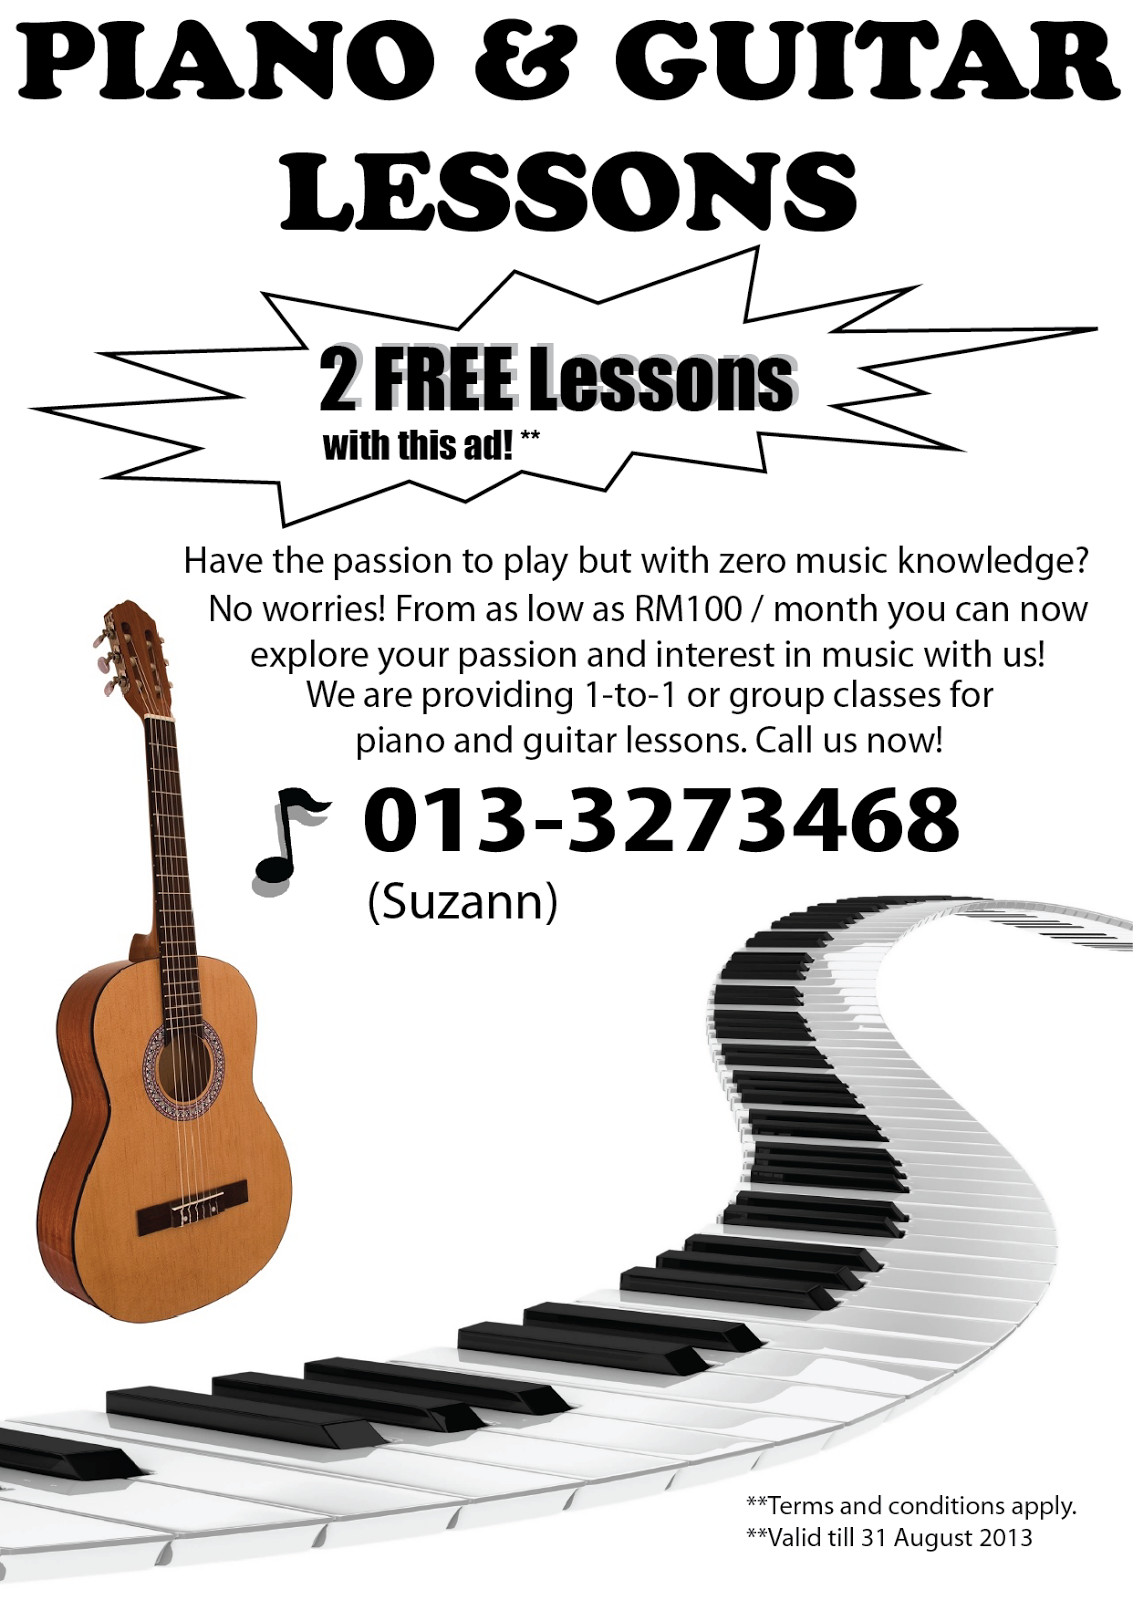 Suzann.Music: Piano and Guitar Lessons Available now!